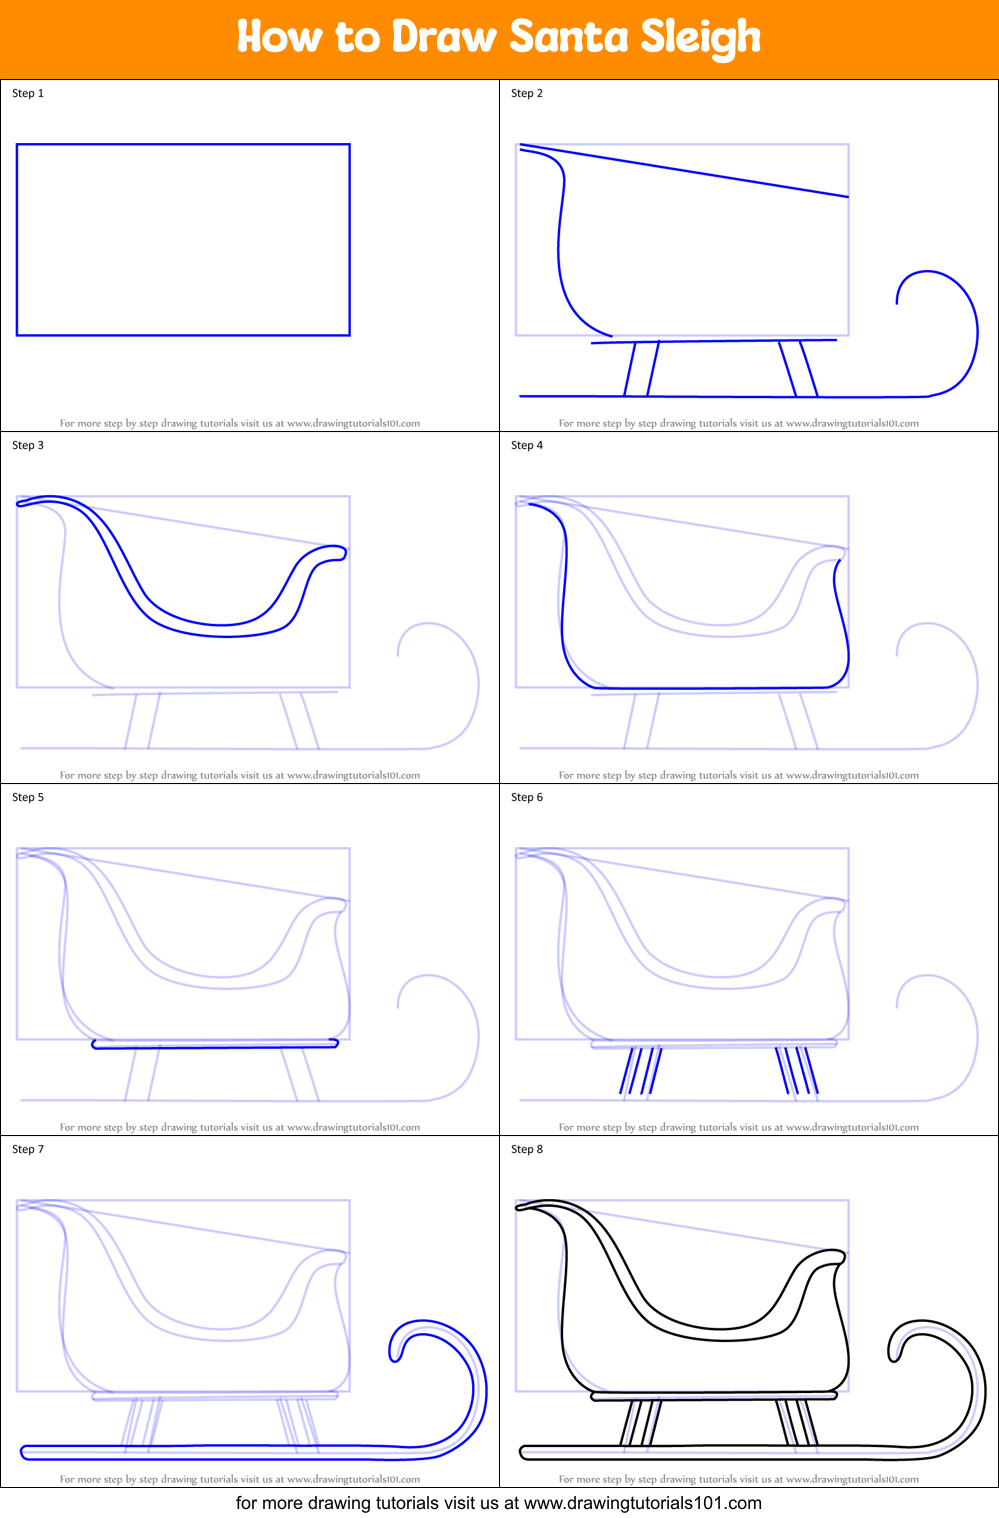 How to Draw Santa Sleigh printable step by step drawing sheet